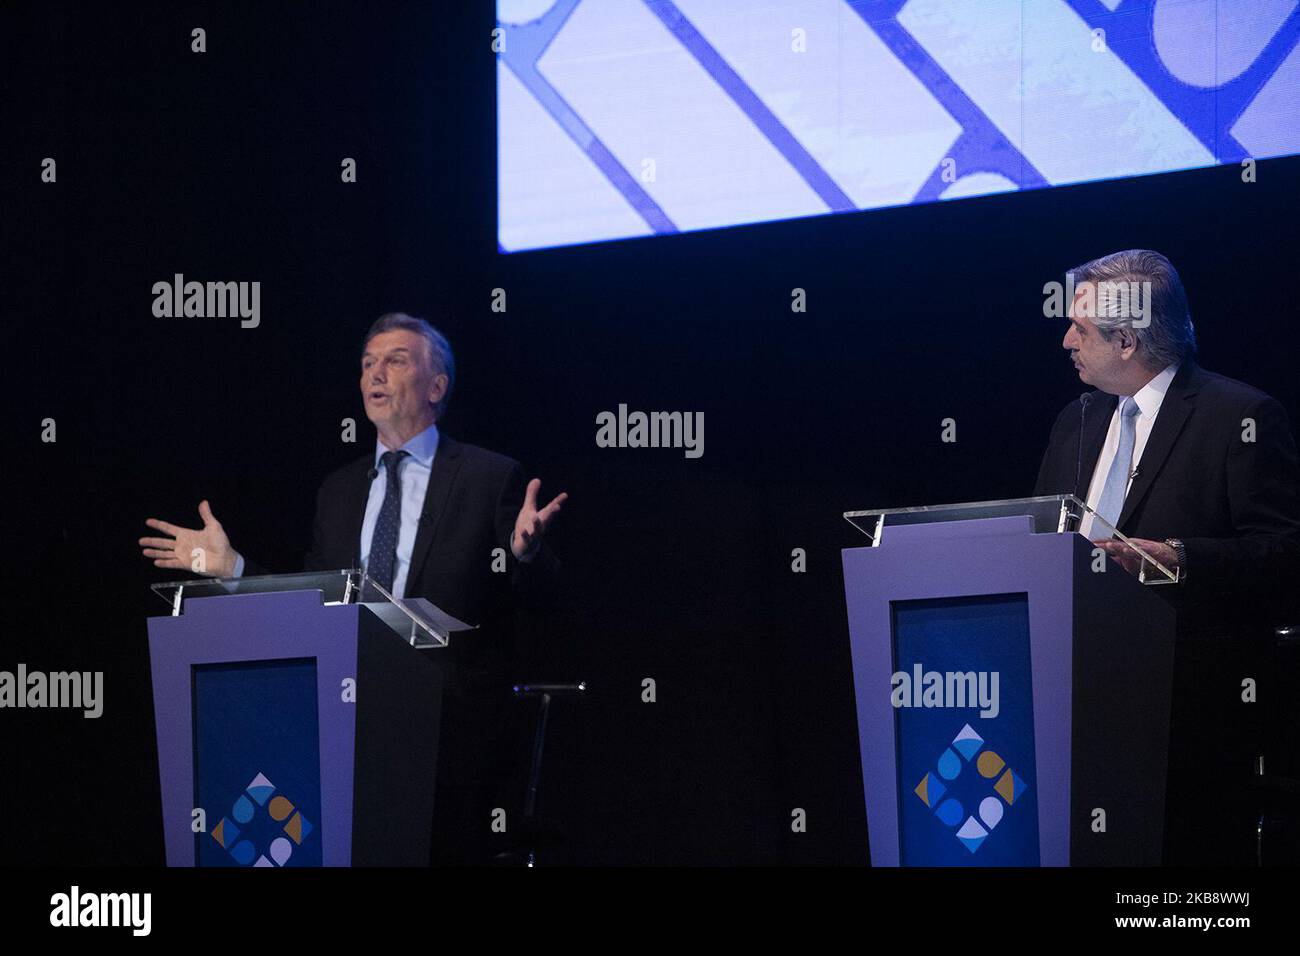 Mauricio Macri, Argentina's president, left, speaks while Alberto Fernandez, presidential candidate for Frente de Todos party, listens during a presidential candidate debate in Buenos Aires, Argentina, on Sunday, Oct. 20, 2019. (Photo by MatÃas Baglietto/NurPhoto) Stock Photo